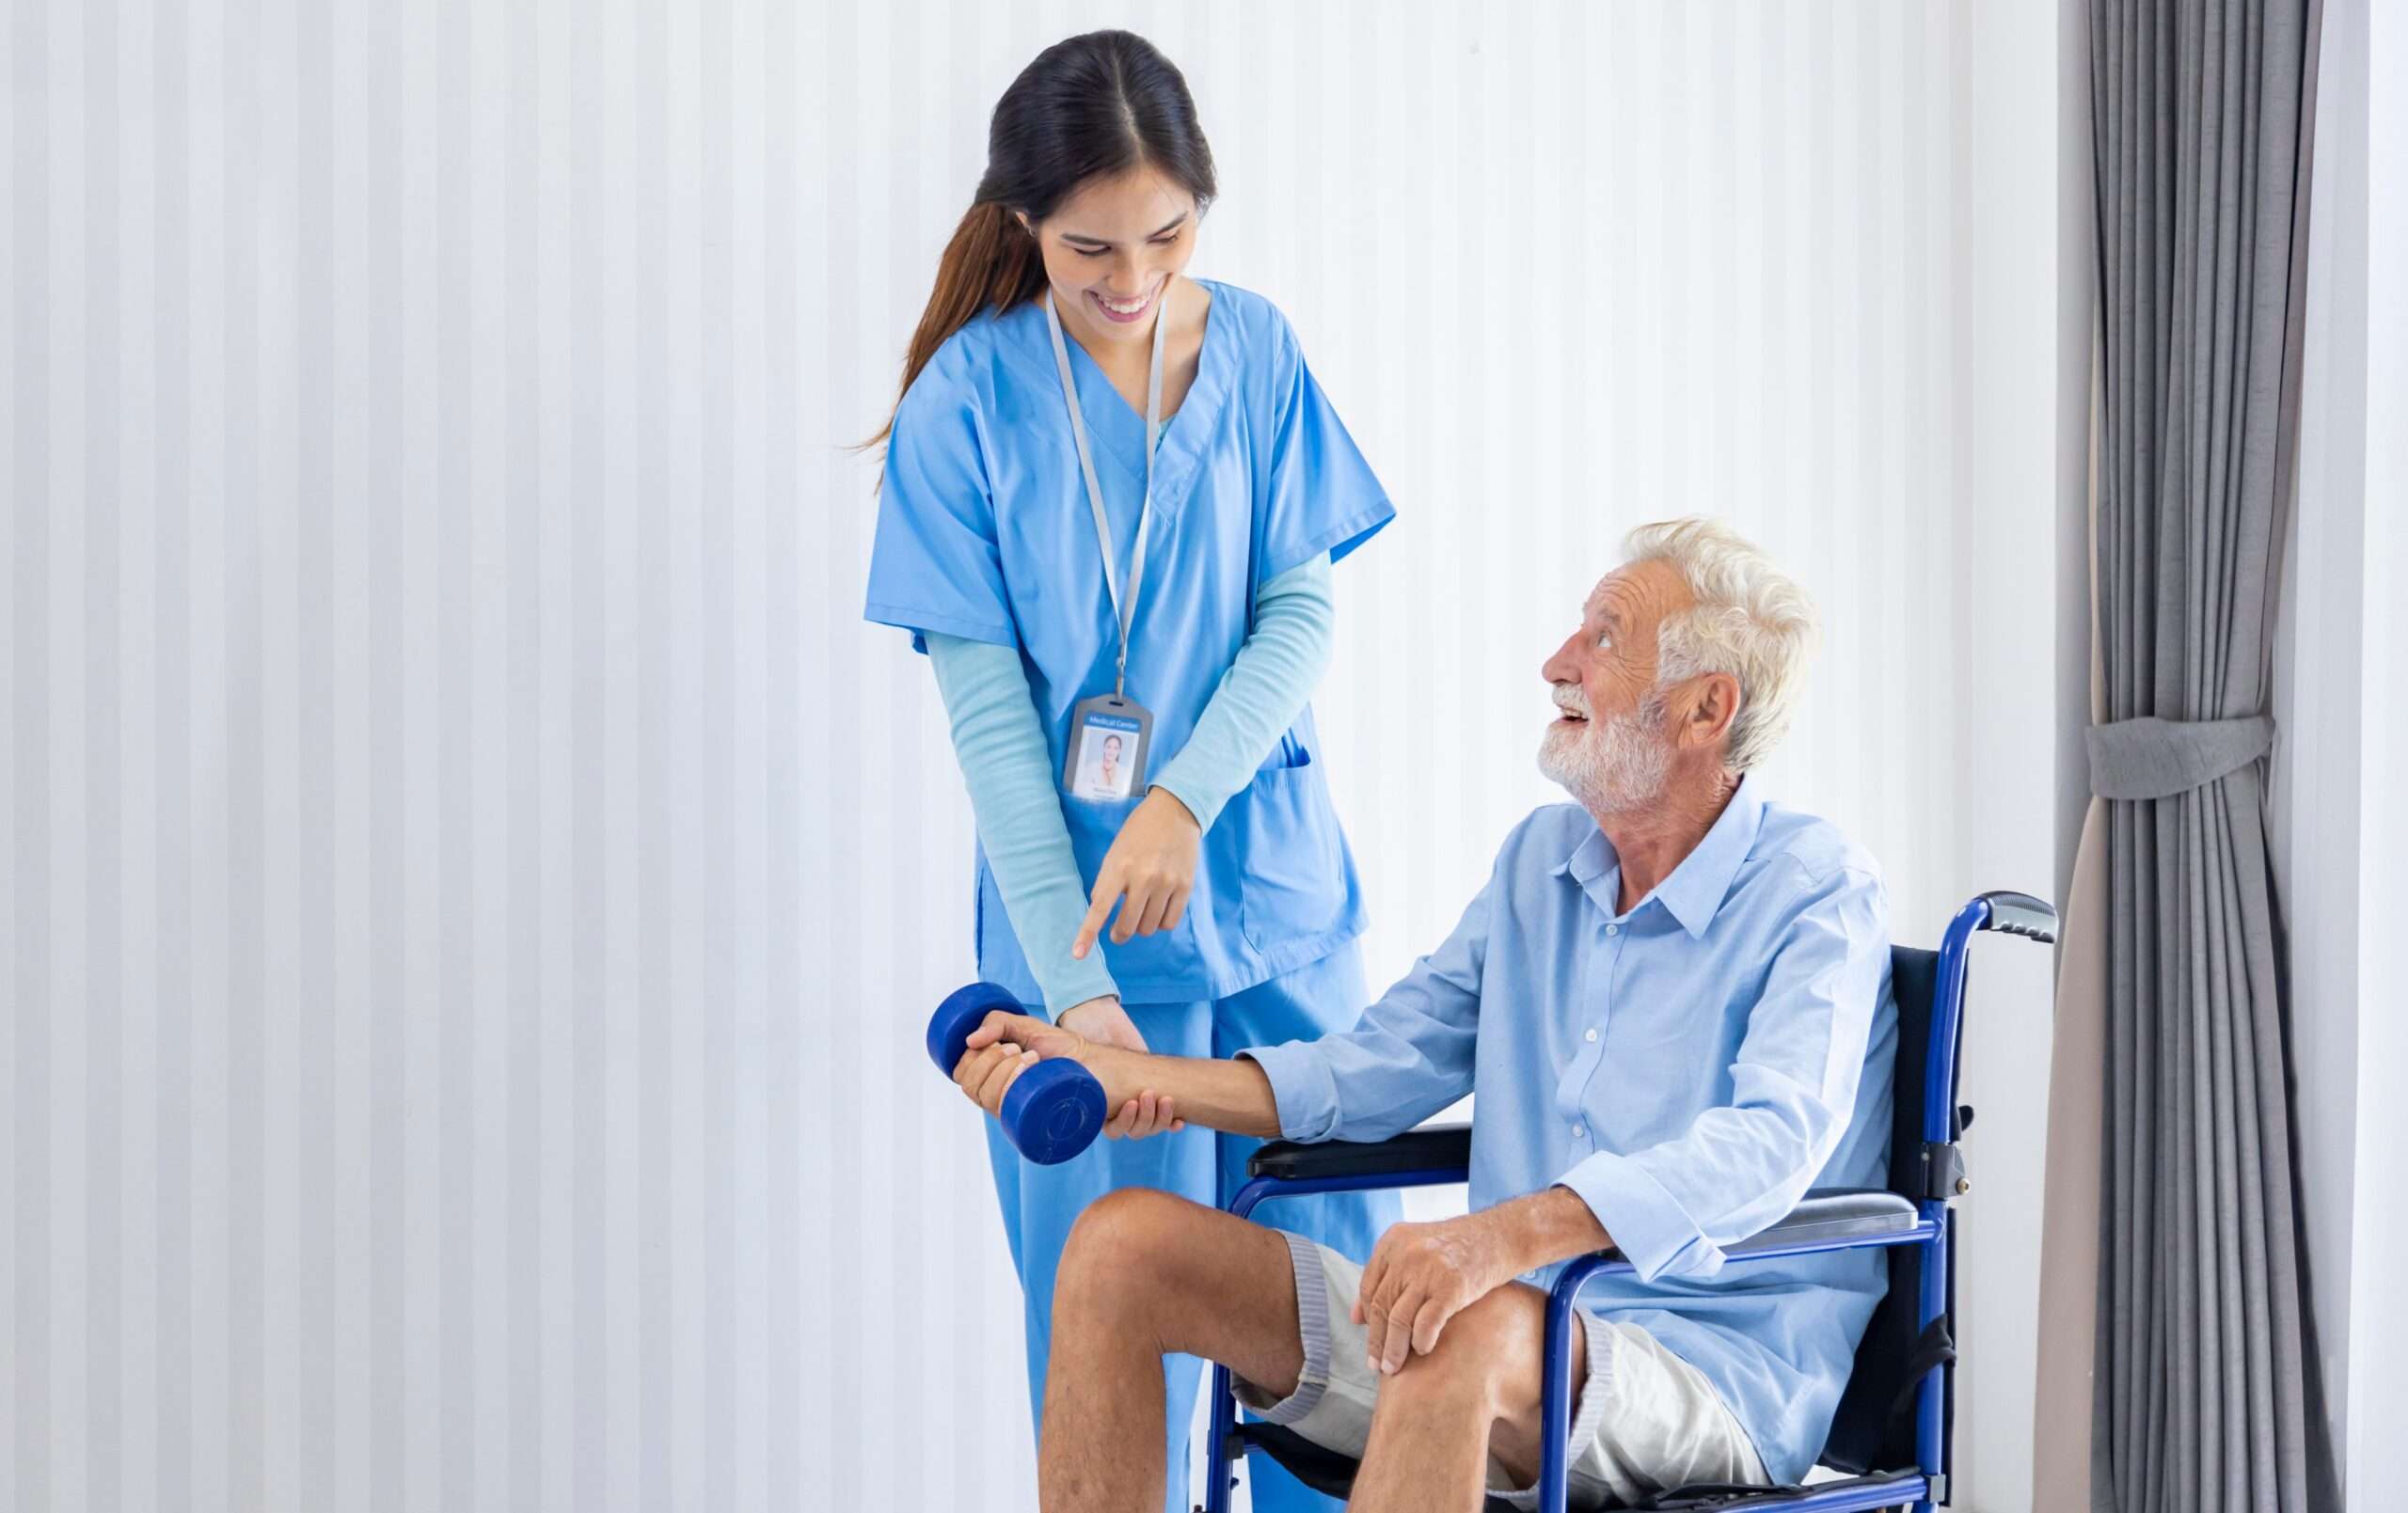 Hospice nurse is helping Caucasian man in wheelchair to exercising muscle strength at pension retirement center for home care rehabilitation and post treatment recovery process